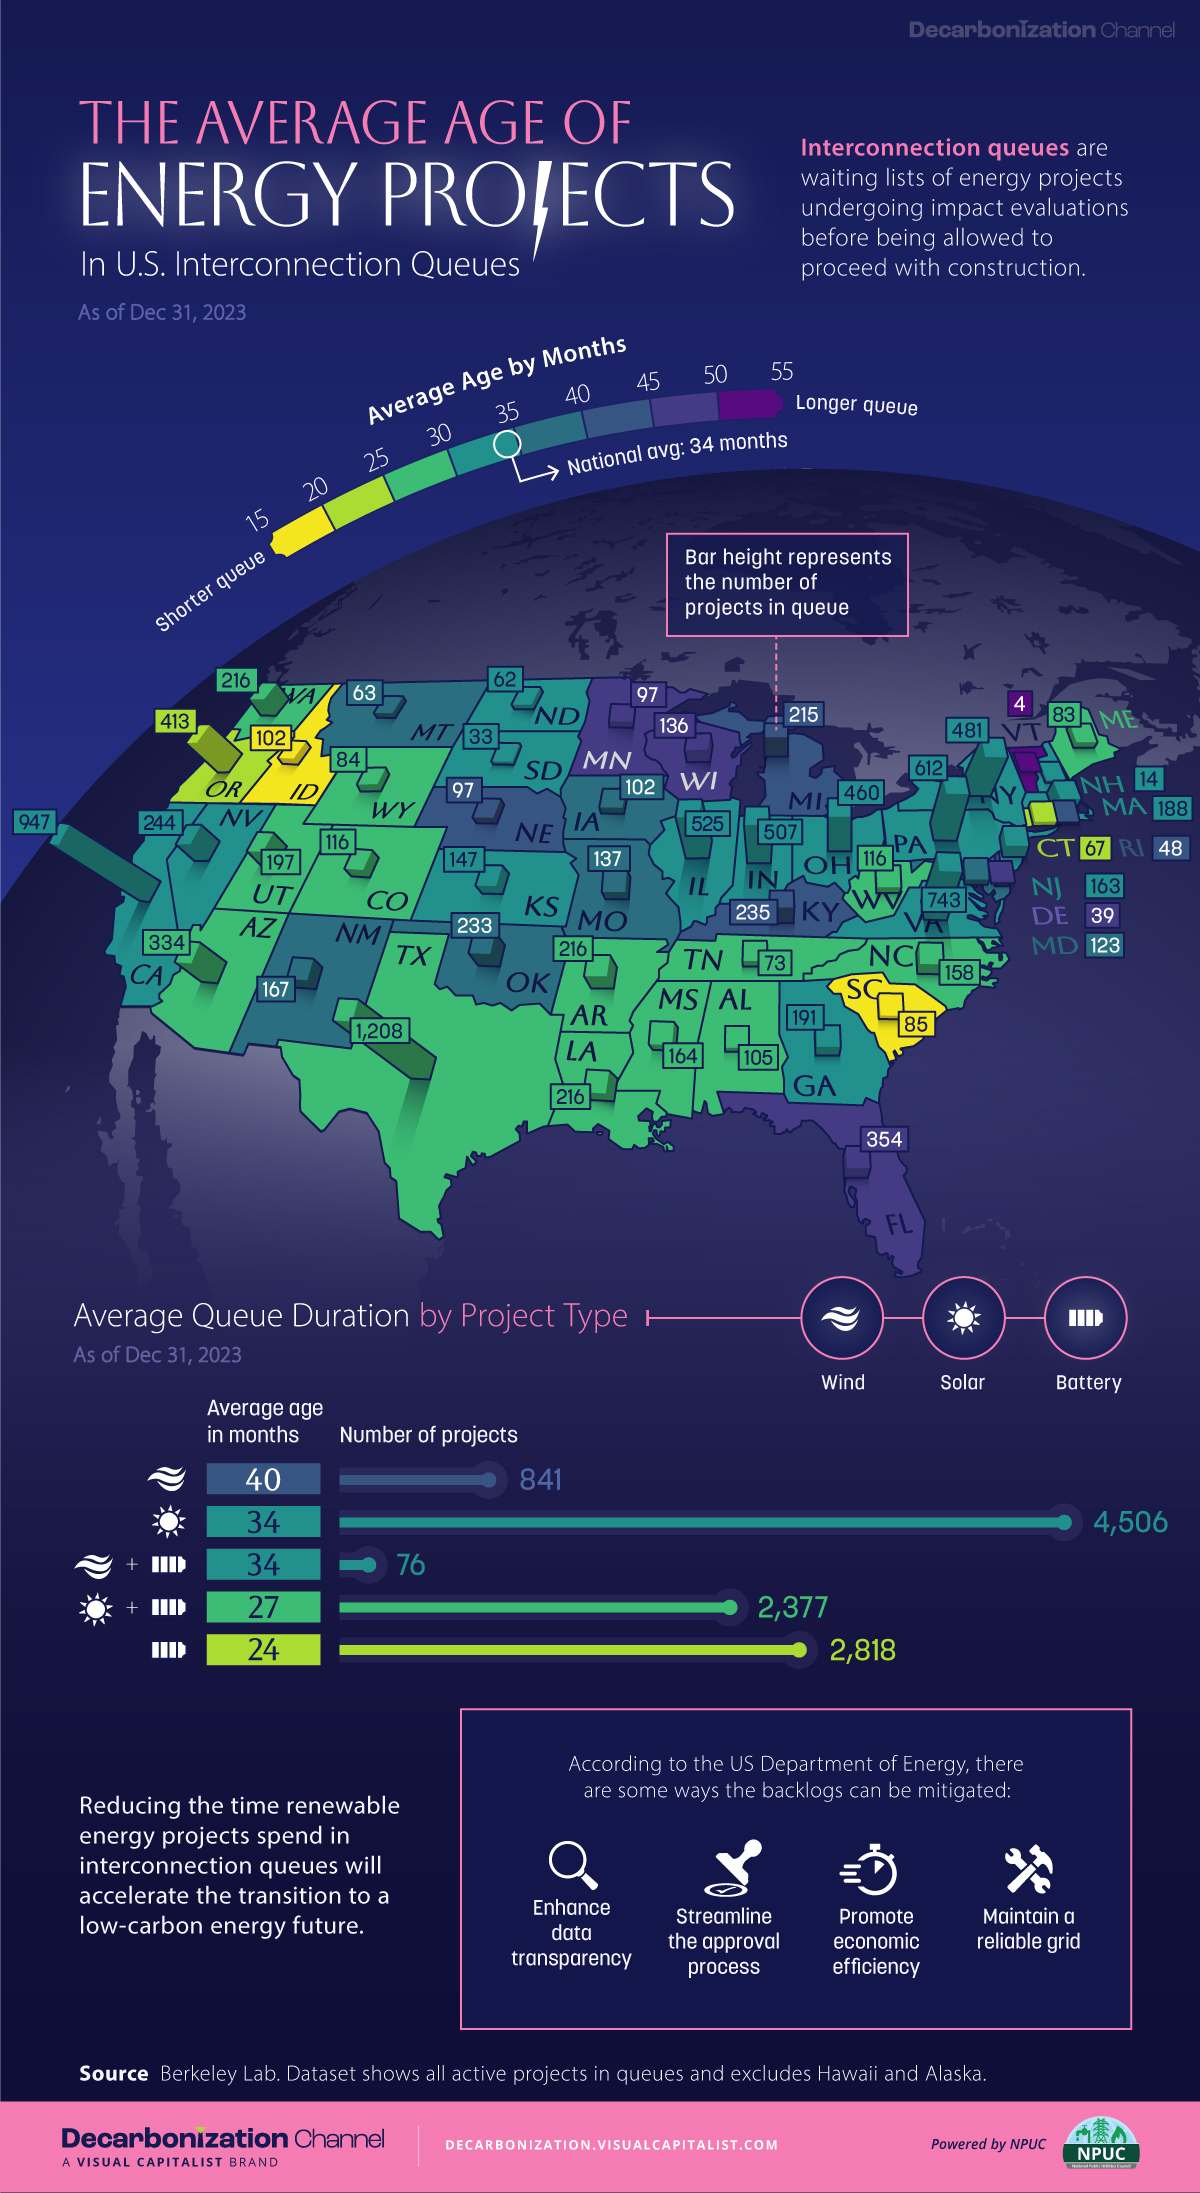 A state-level U.S. map showing the number and average age of energy projects in interconnection queues as of December 31, 2023, highlighting that Texas has the most projects in queue, whereas Vermont has the longest wait time.